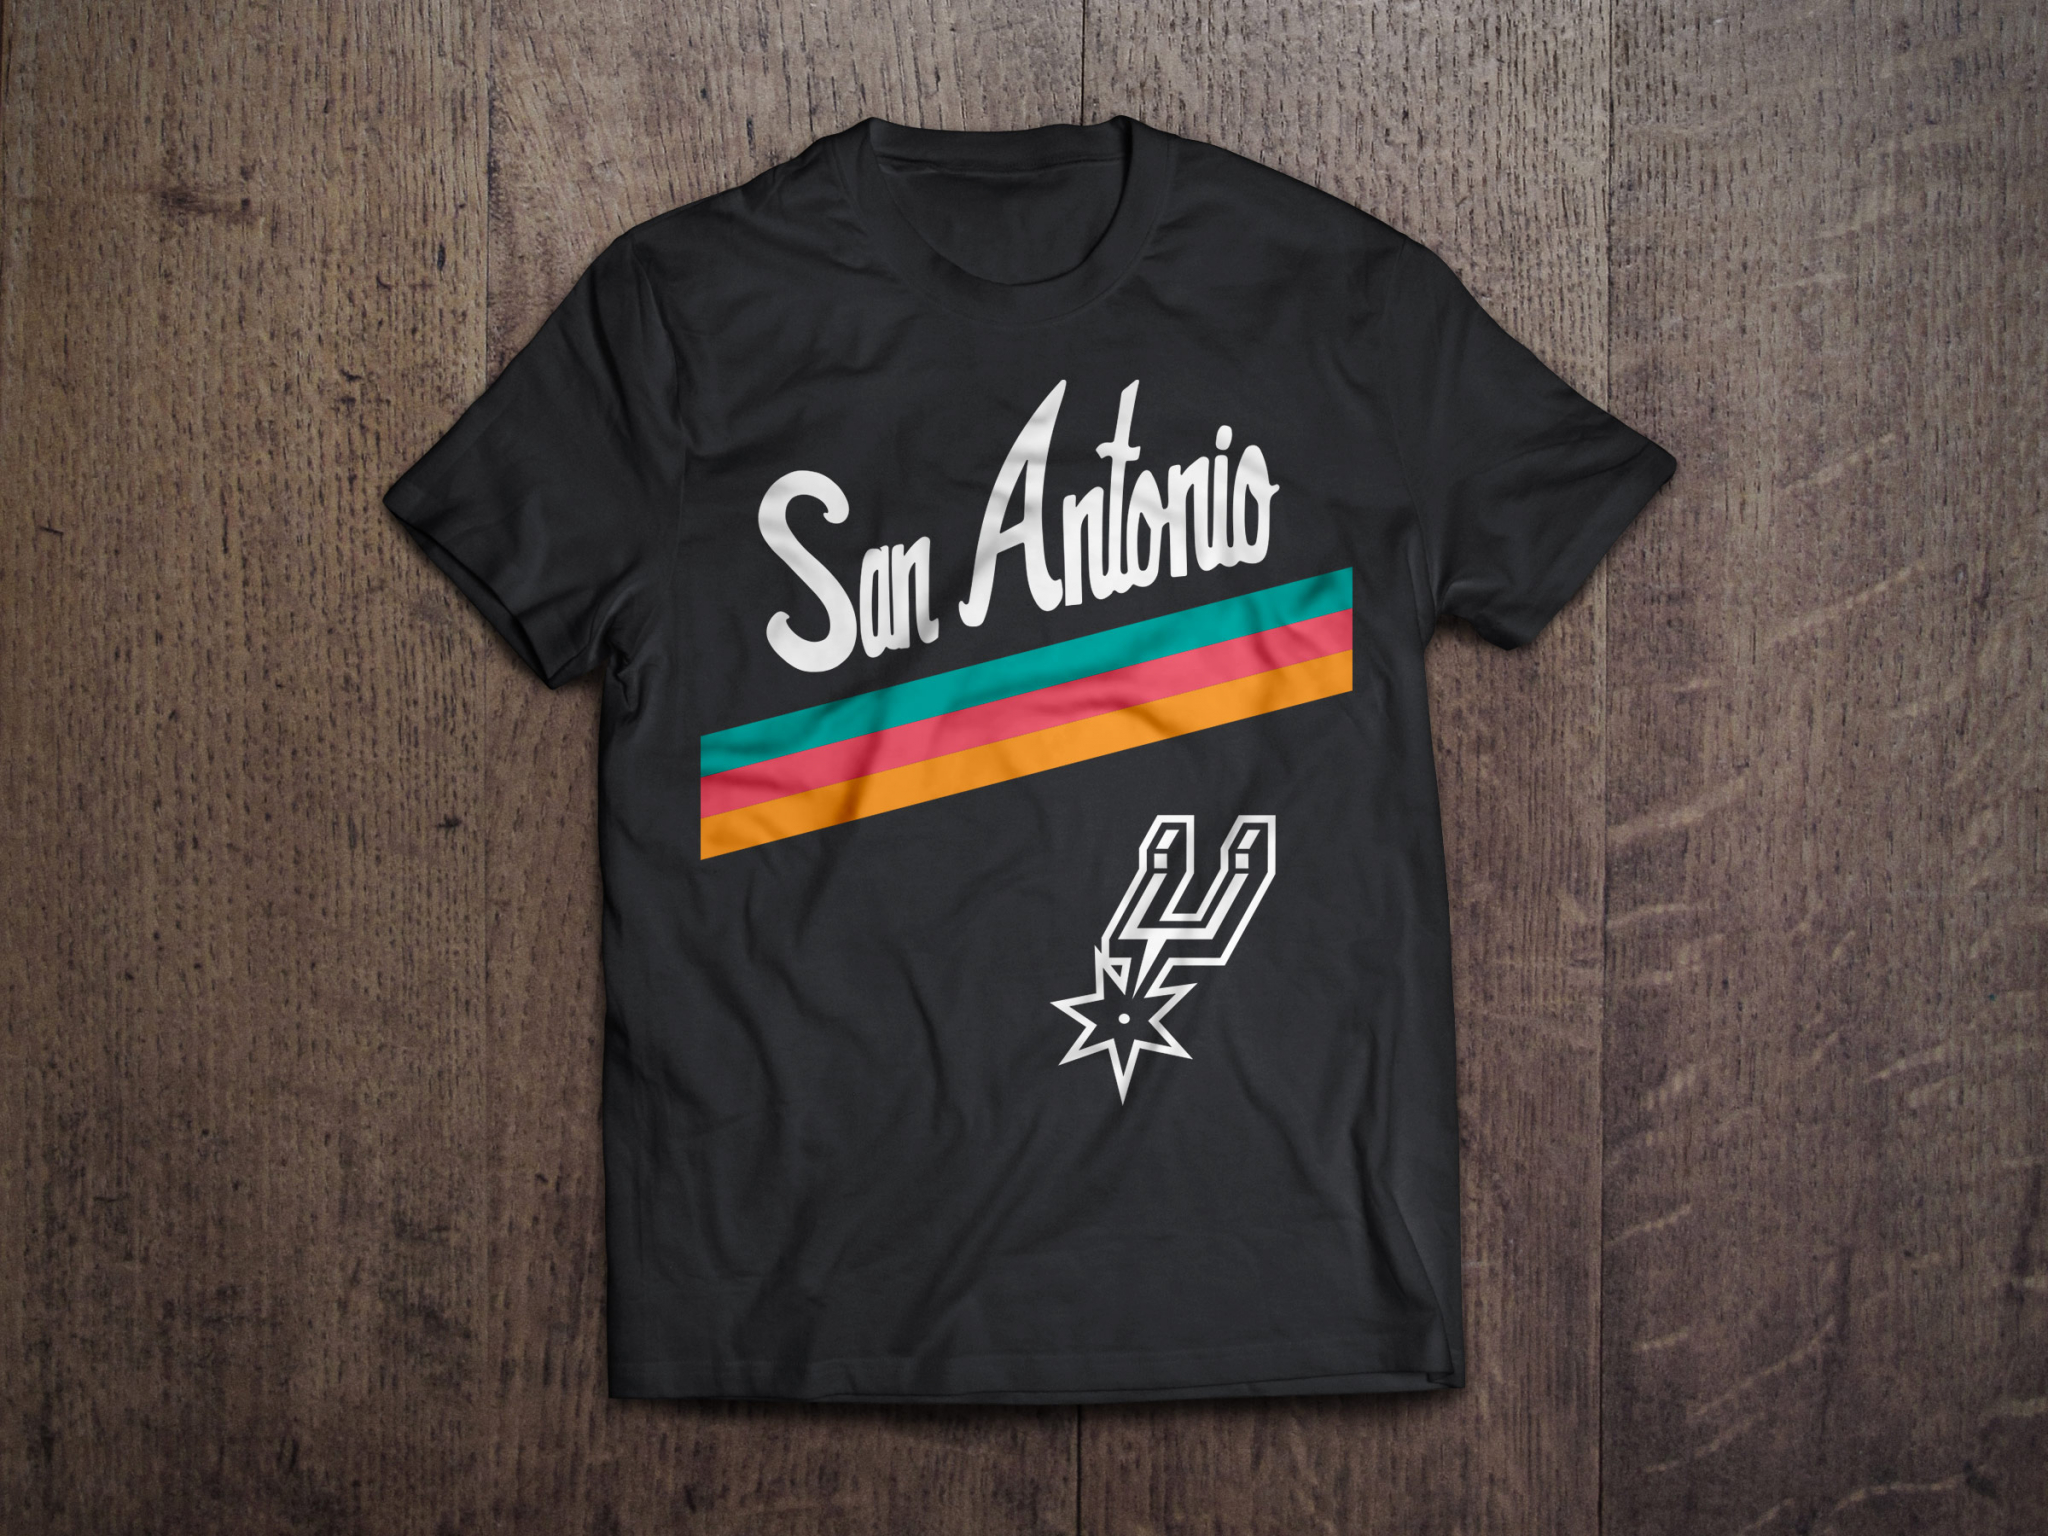 Spurs fans will get a free, 'retro' t 